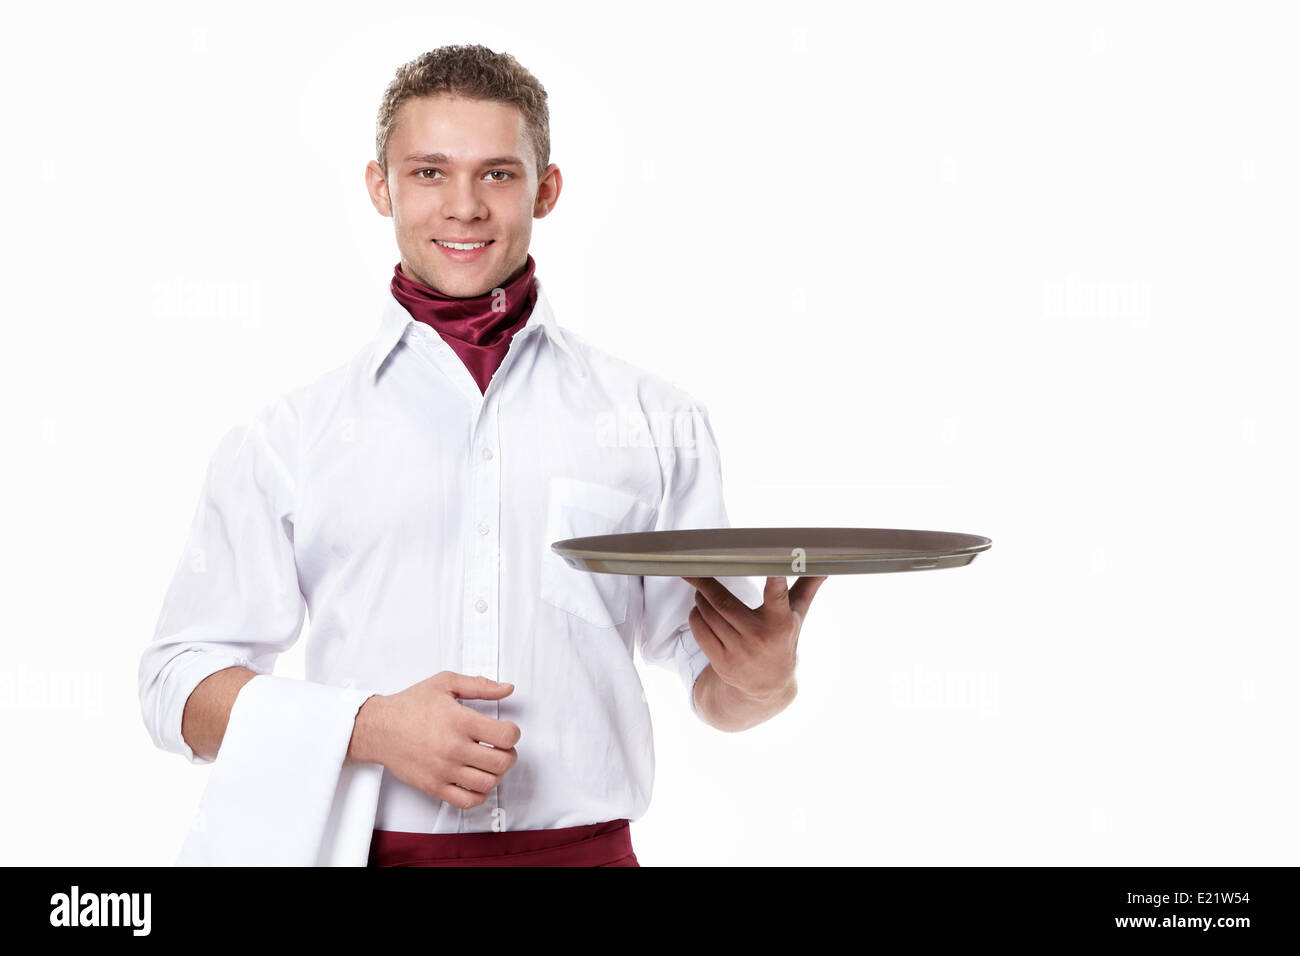 The young waiter Stock Photo